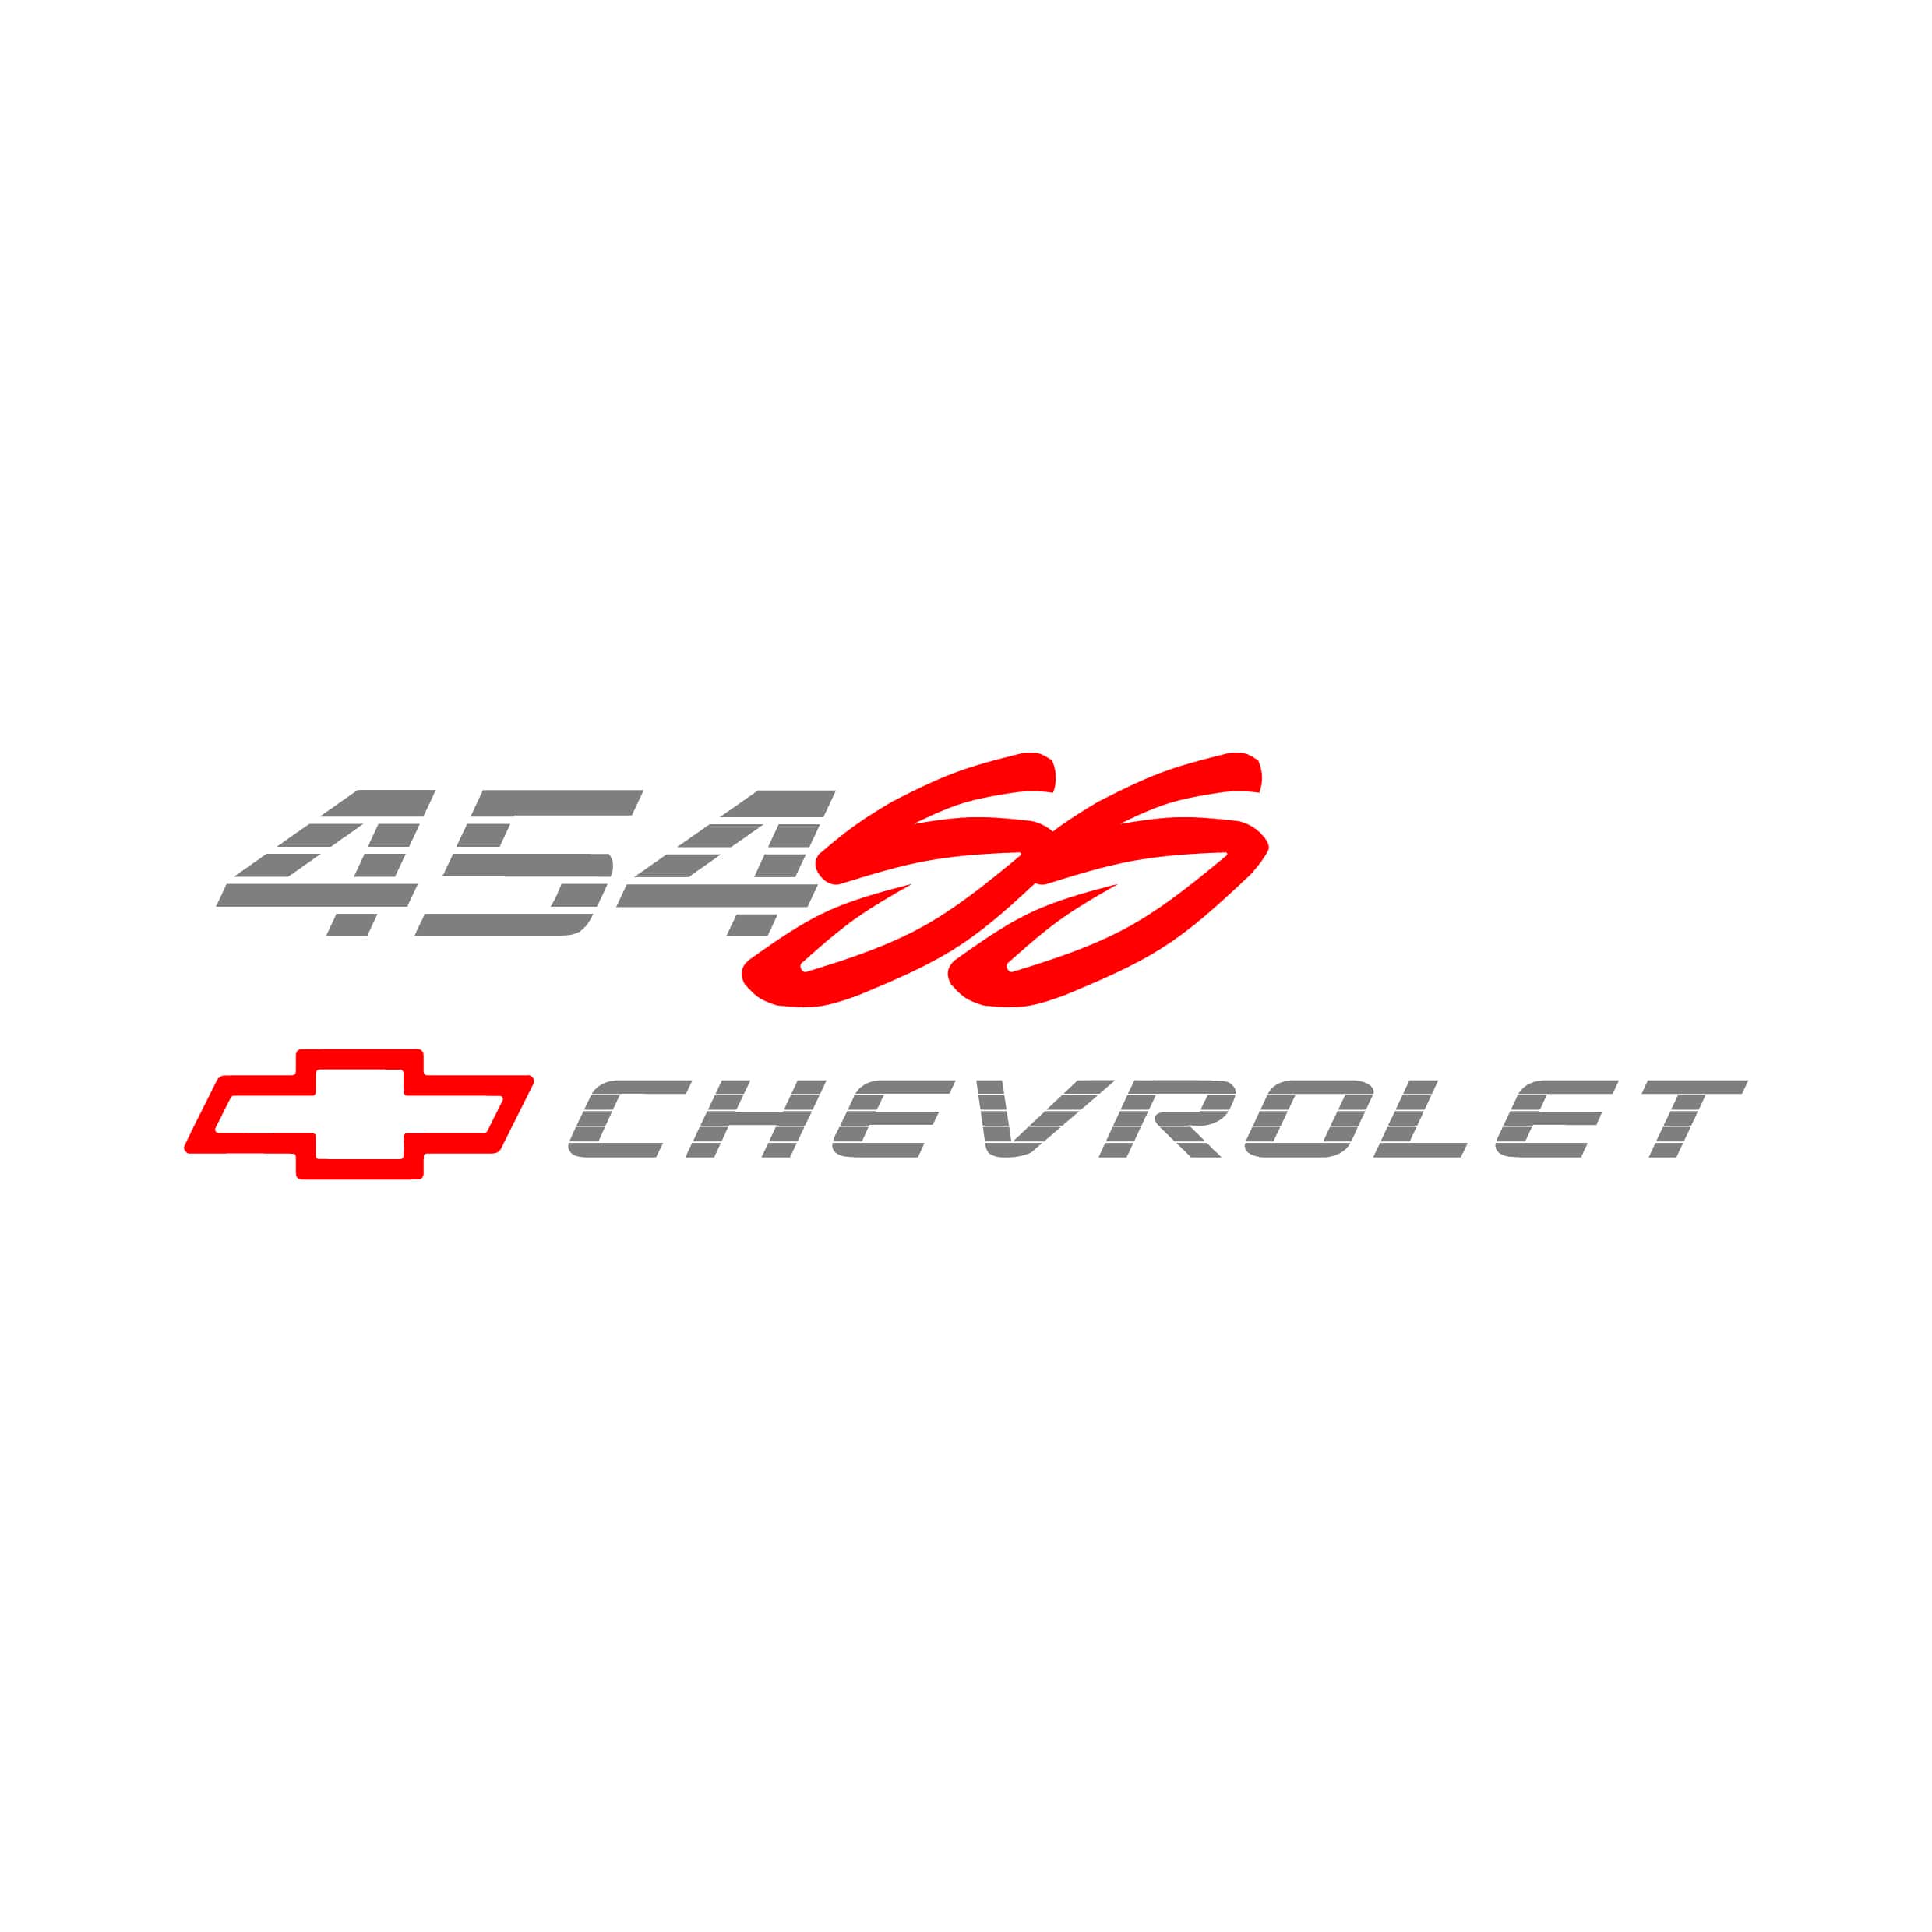 stickers-chevrolet-454ss-ref73-autocollant-voiture-sticker-auto-autocollants-decals-sponsors-racing-tuning